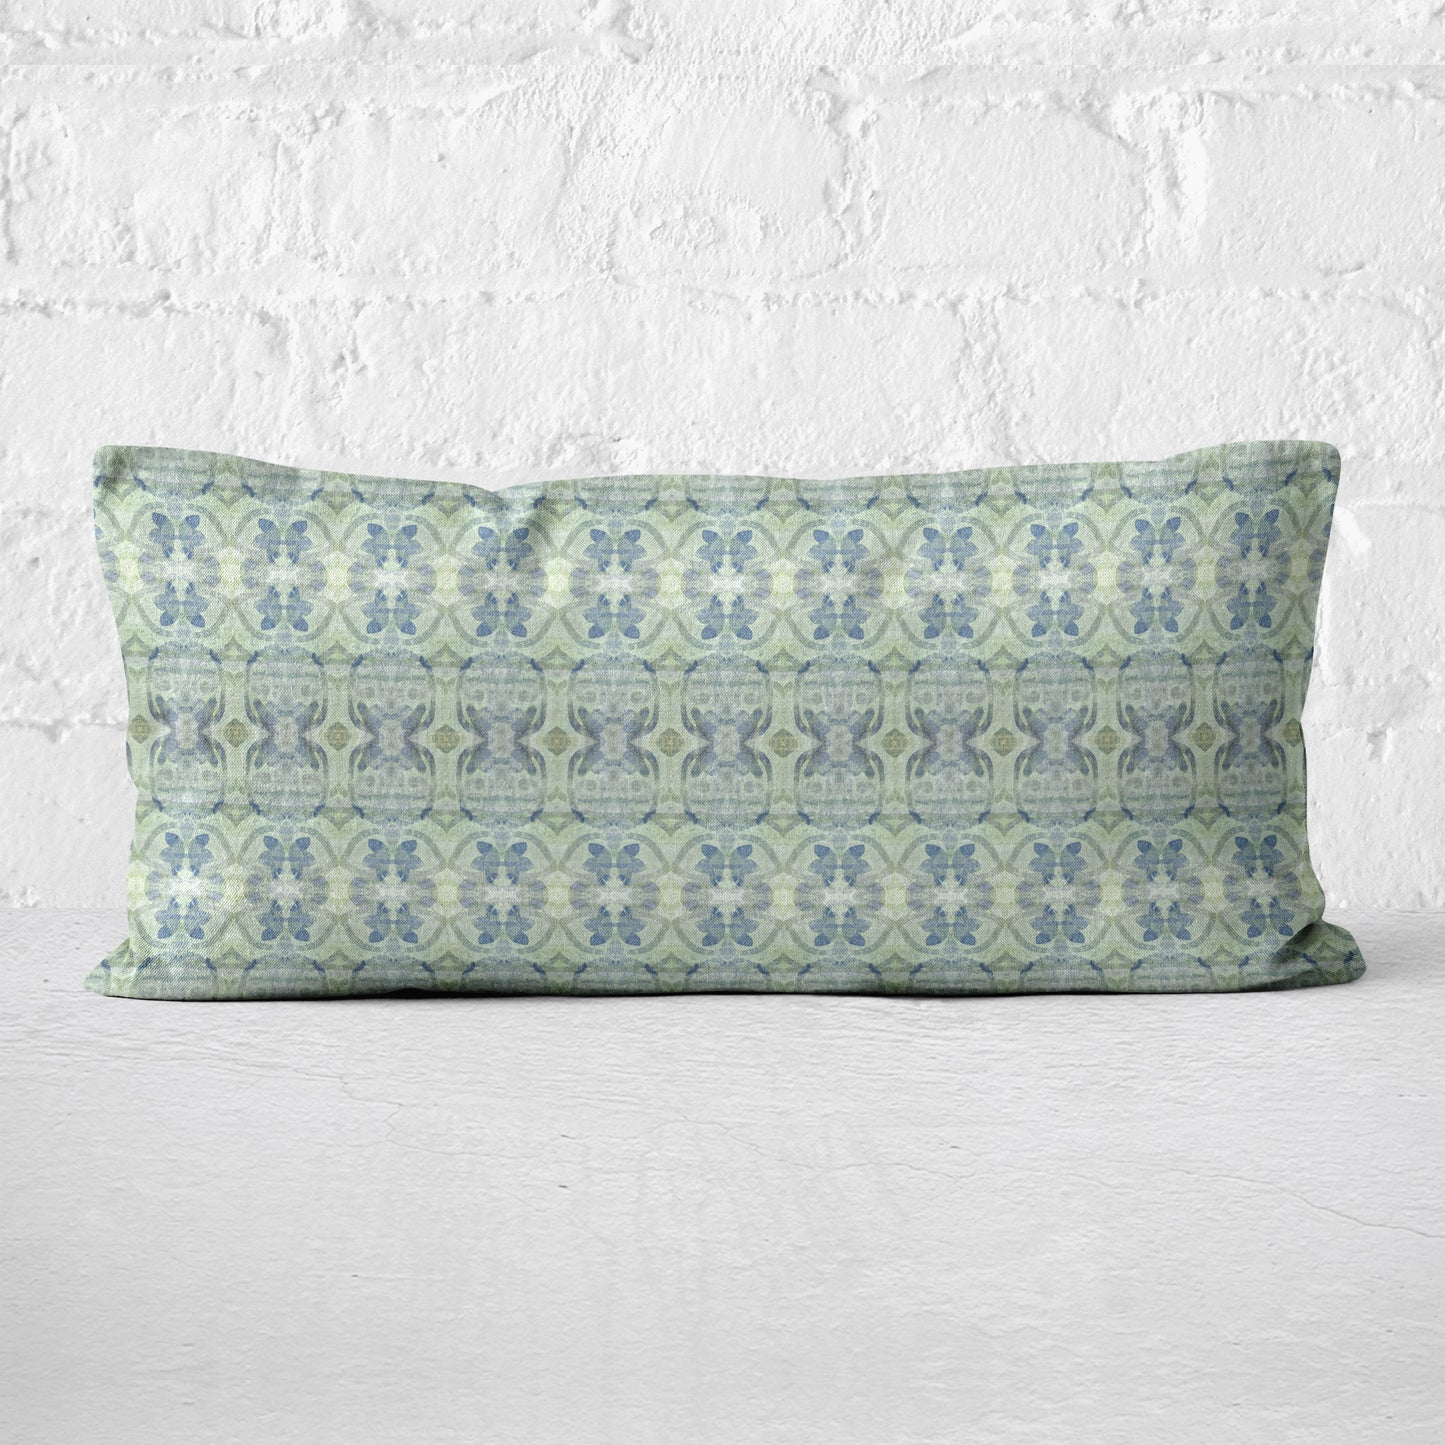 Lumbar pillow featuring an abstract blue and green floral pattern leaning against a white brick wall